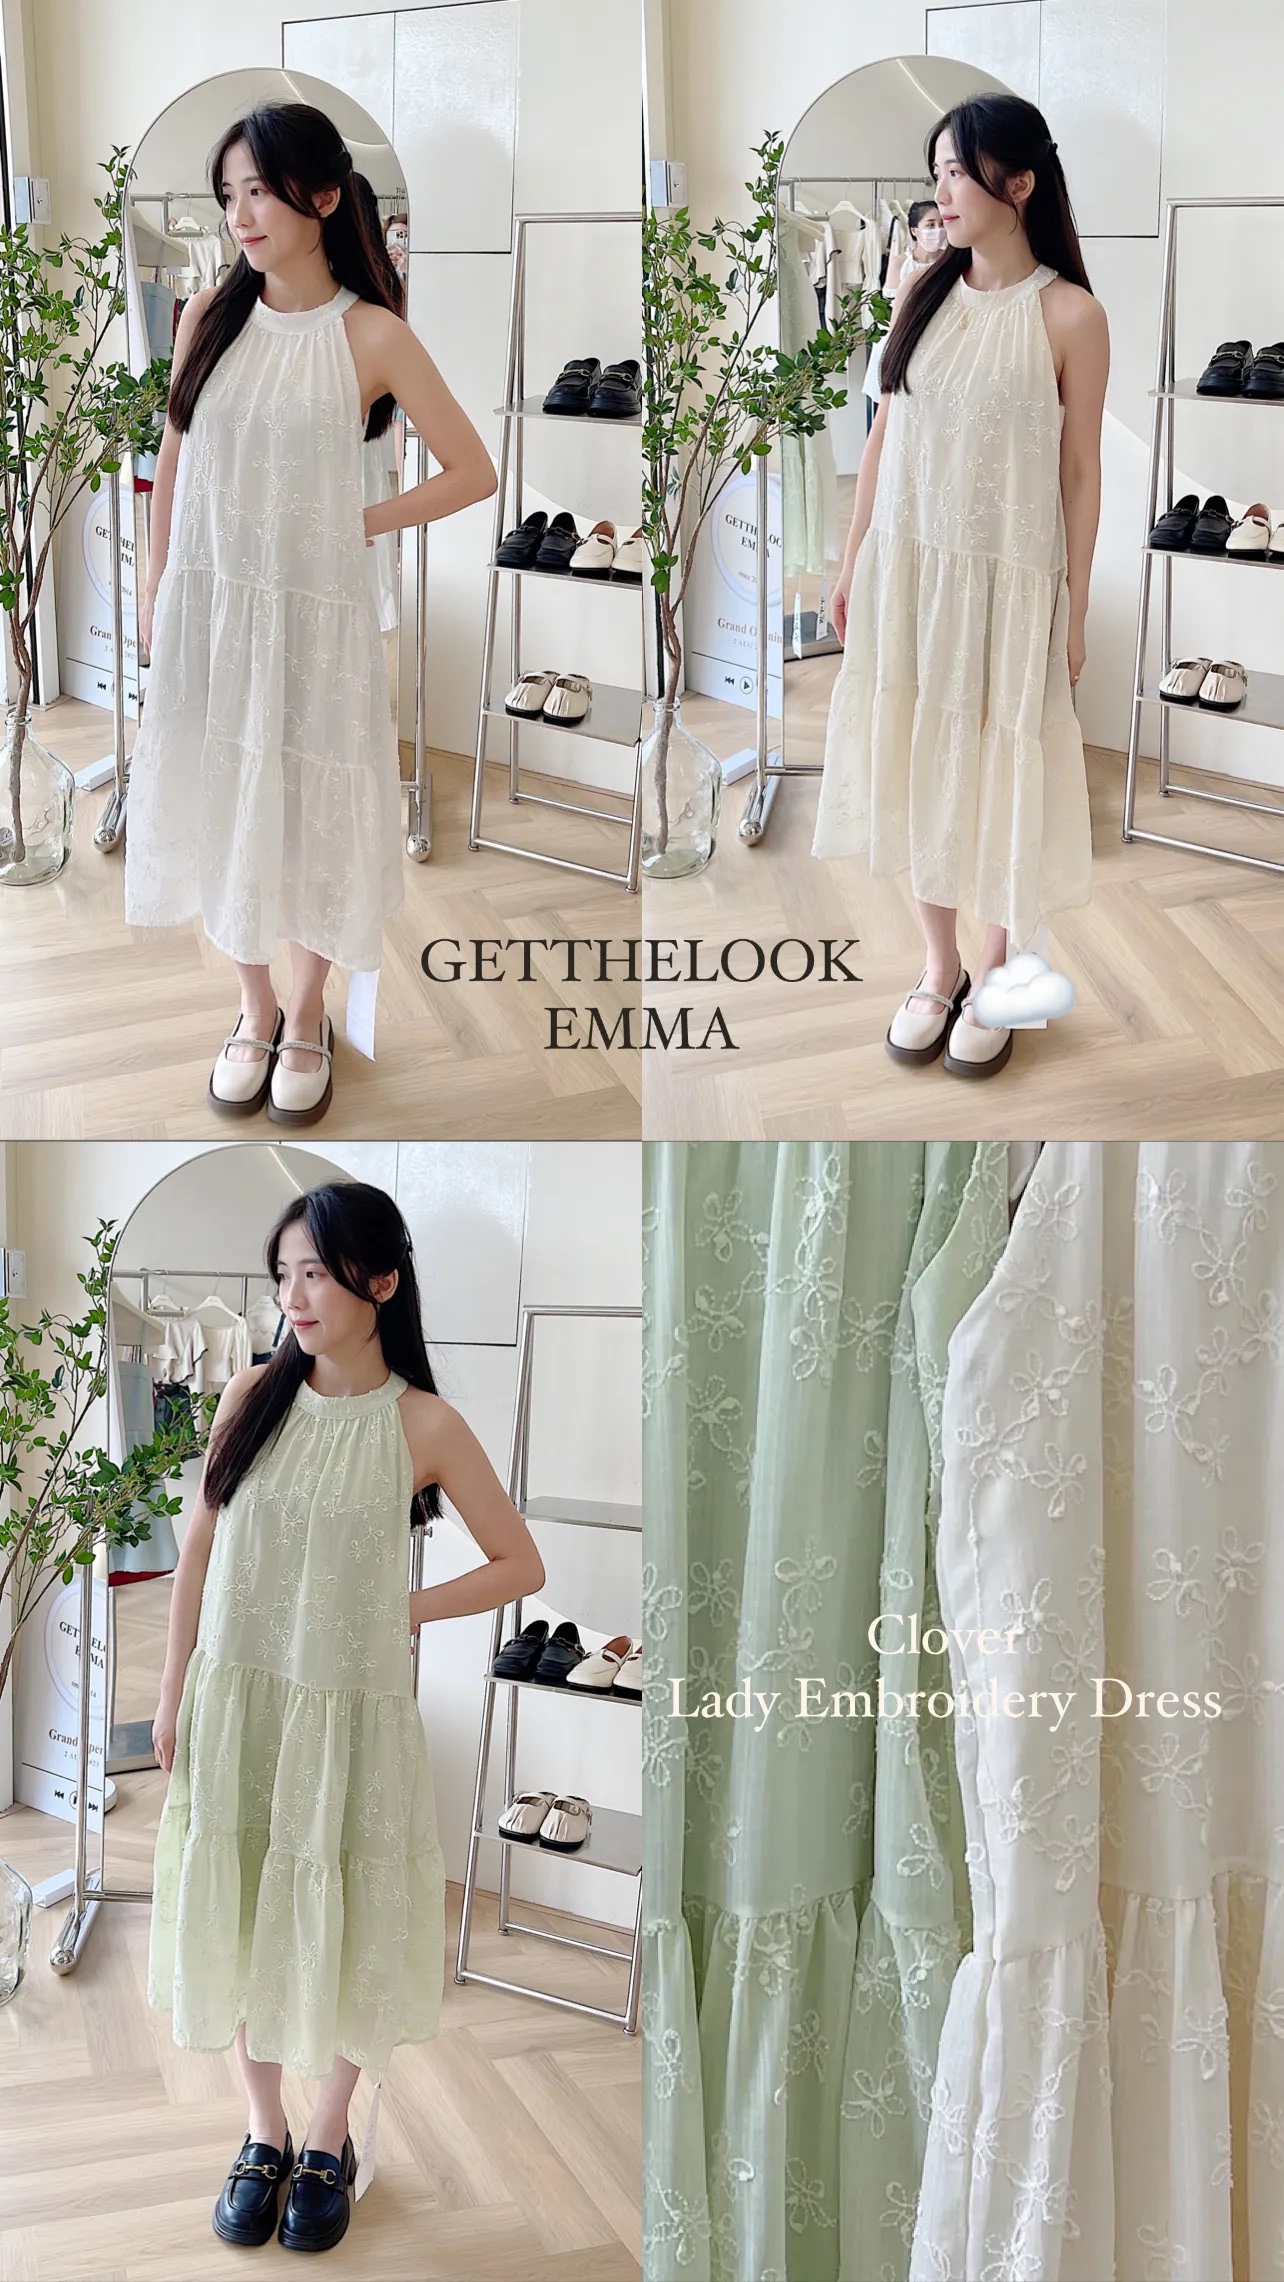 Clover Lady Embroidery Dress